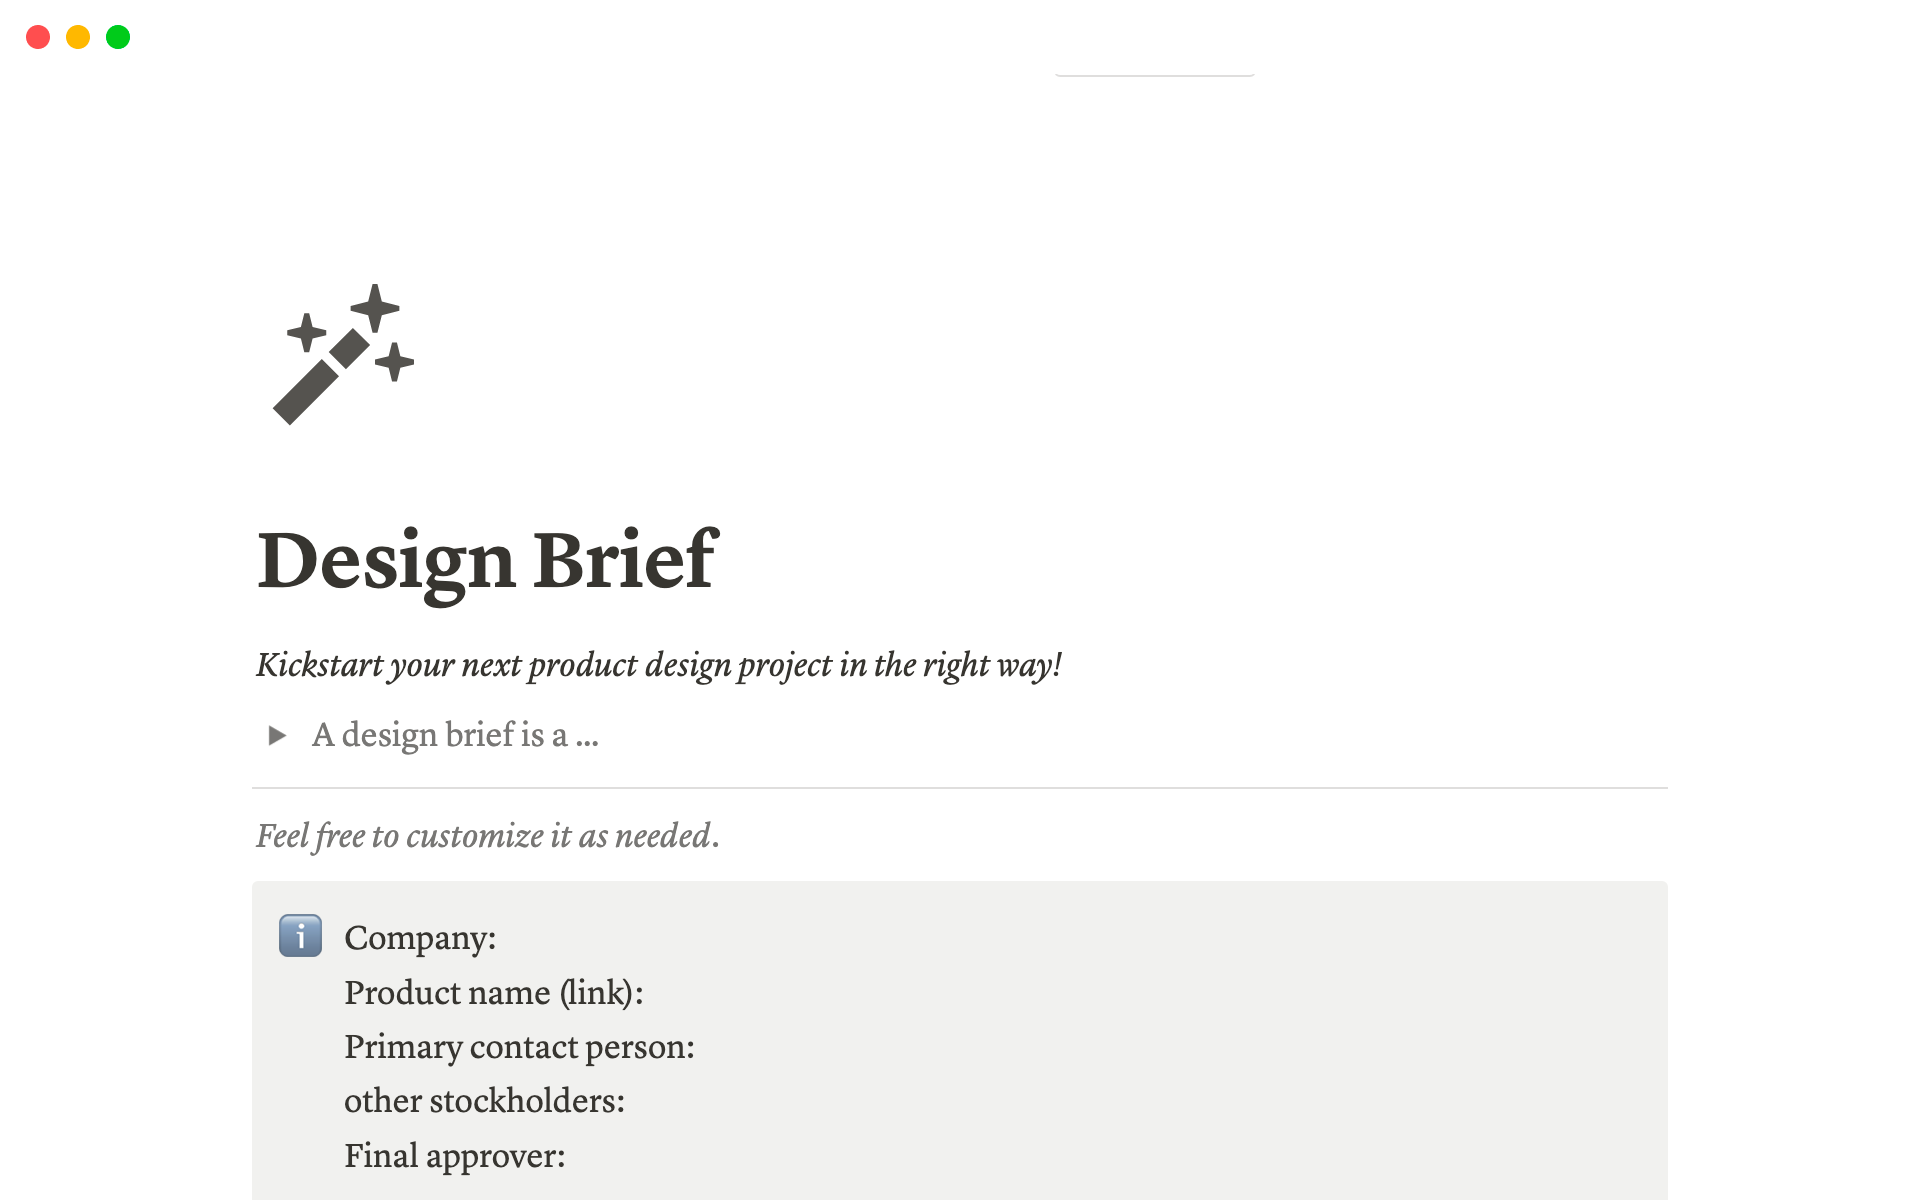 Best 10 Design Brief Templates for Product Strategistsのテンプレートのプレビュー